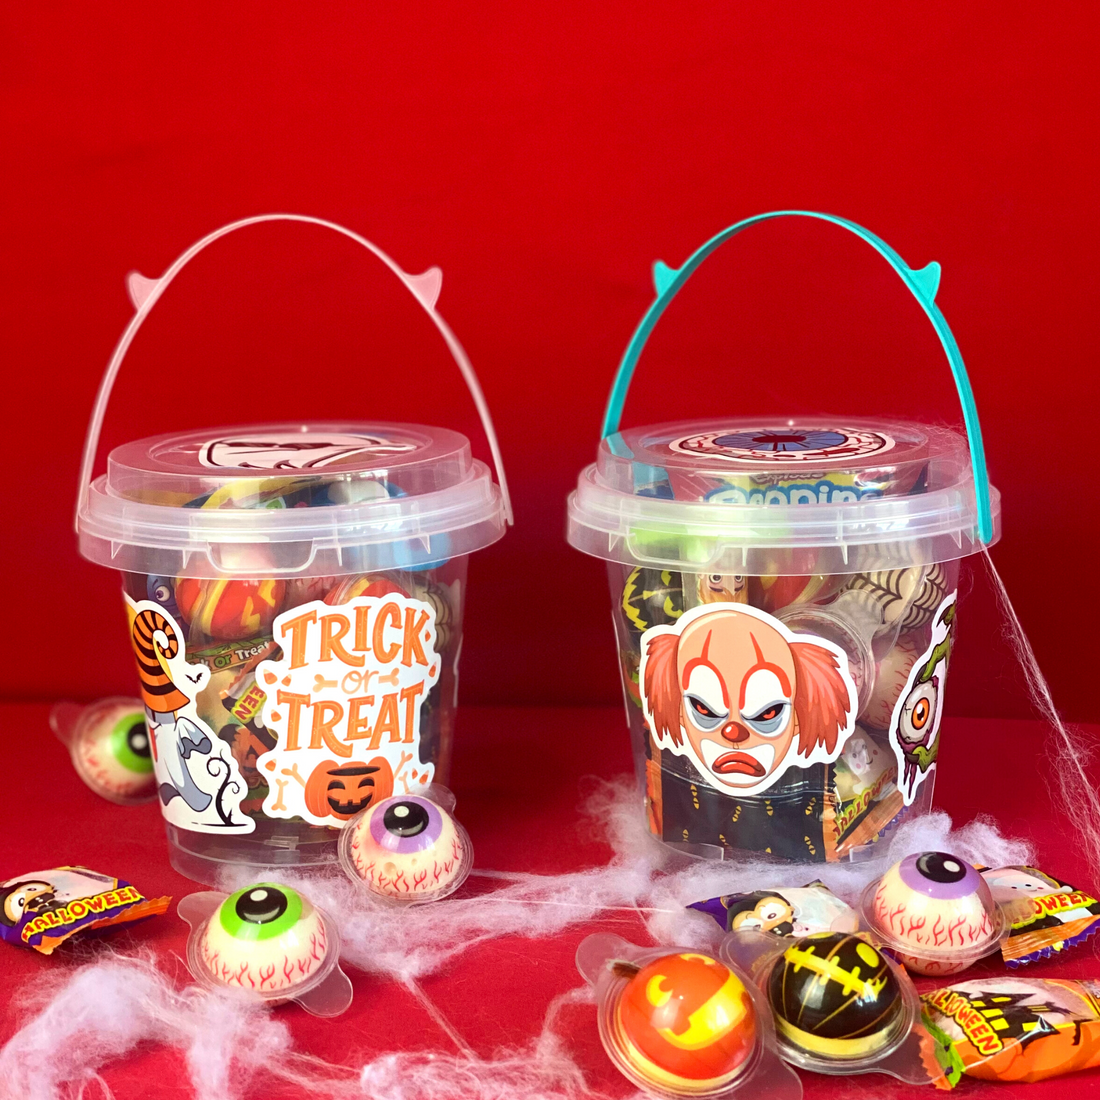 TRICK OR TREAT CANDY BUCKET